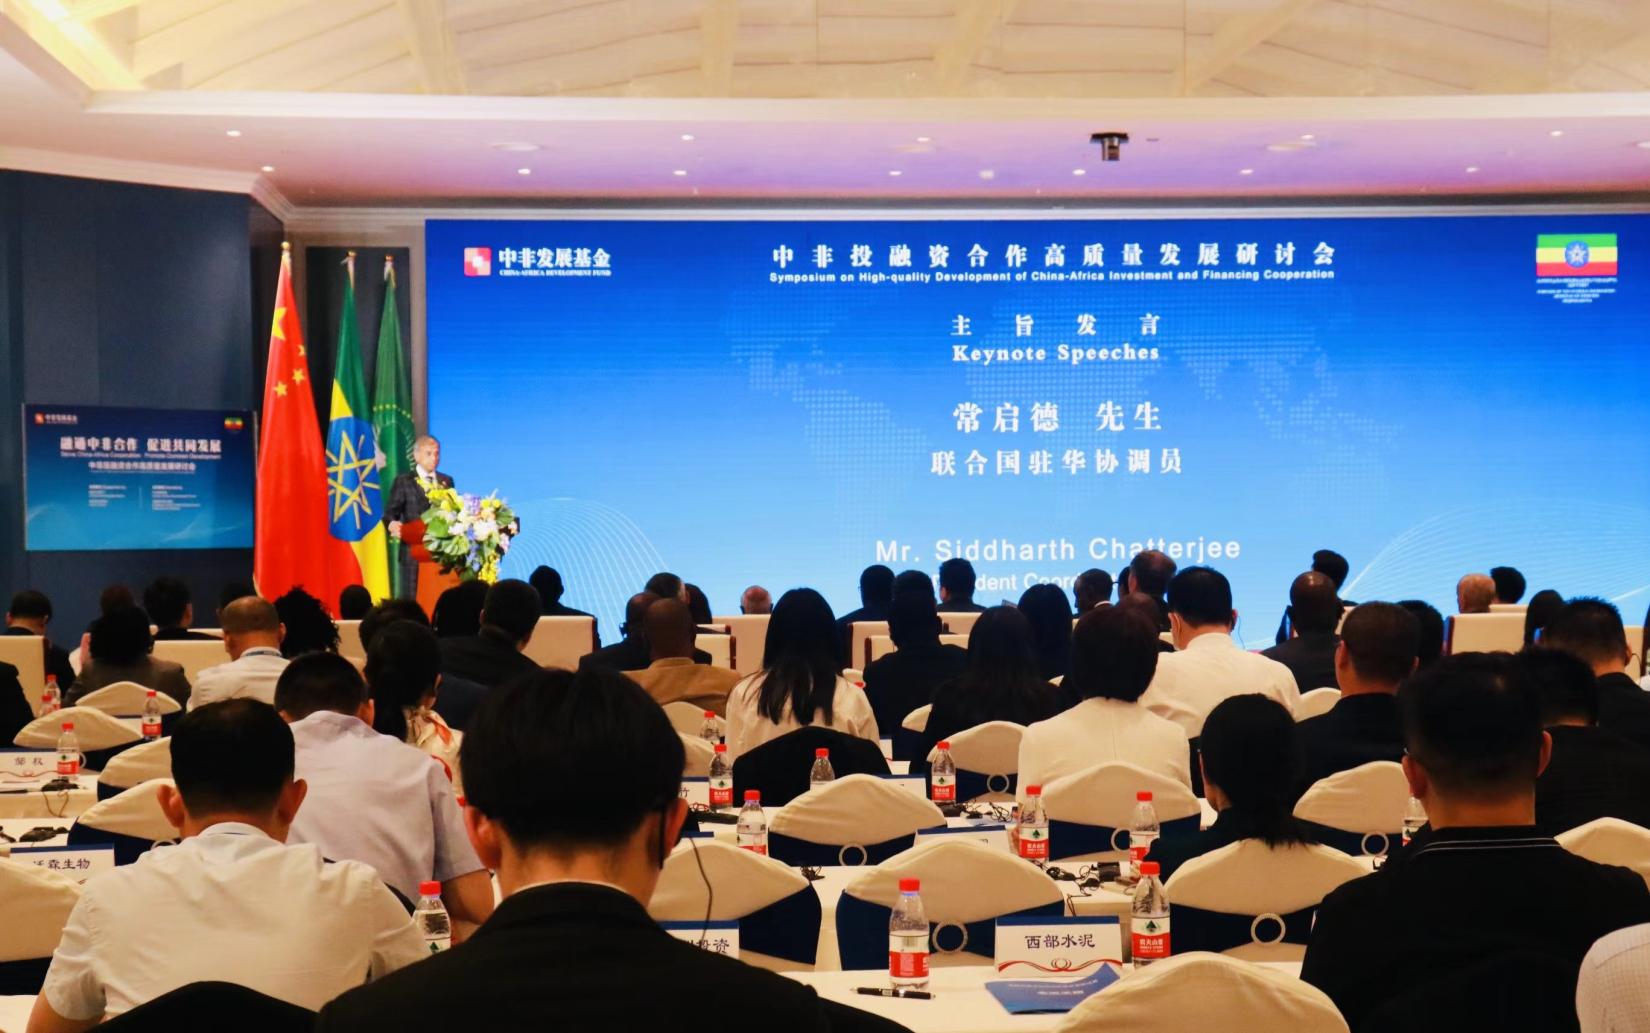 Symposium on High Quality Development of China-Africa Investment and Financing Cooperation